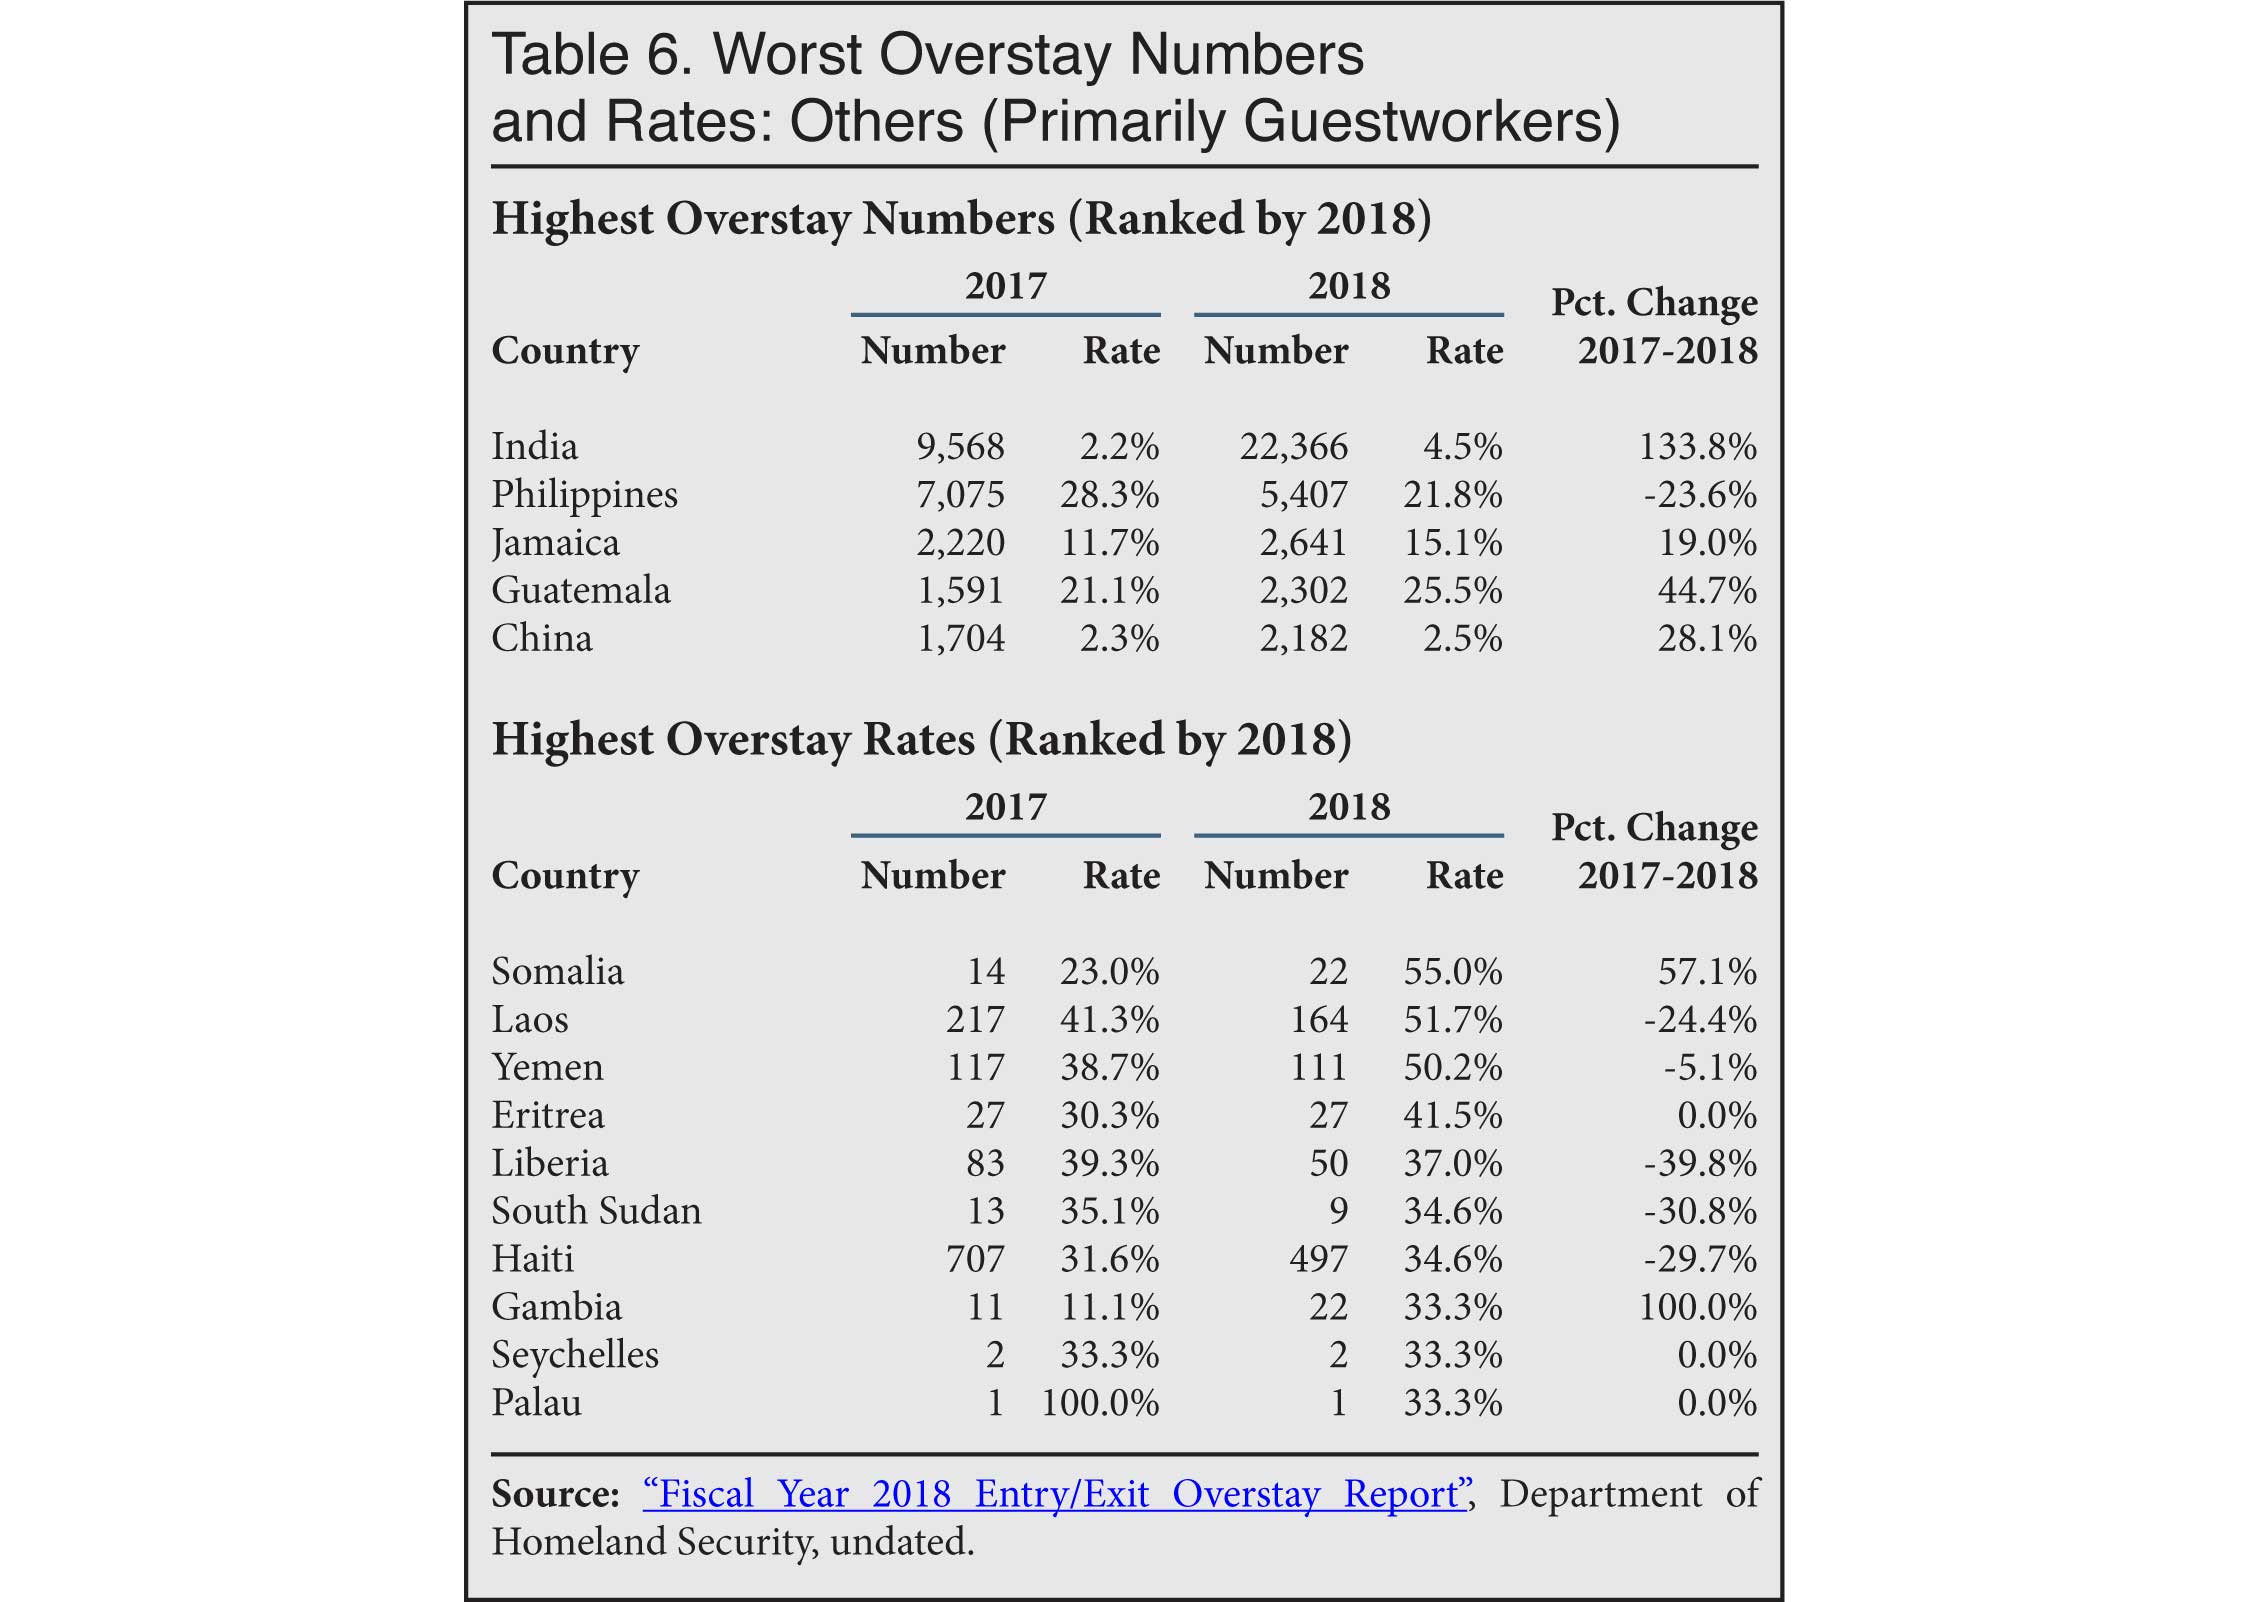 Table: Worst Visa Overstay Numbers and Rates, Others, 2018